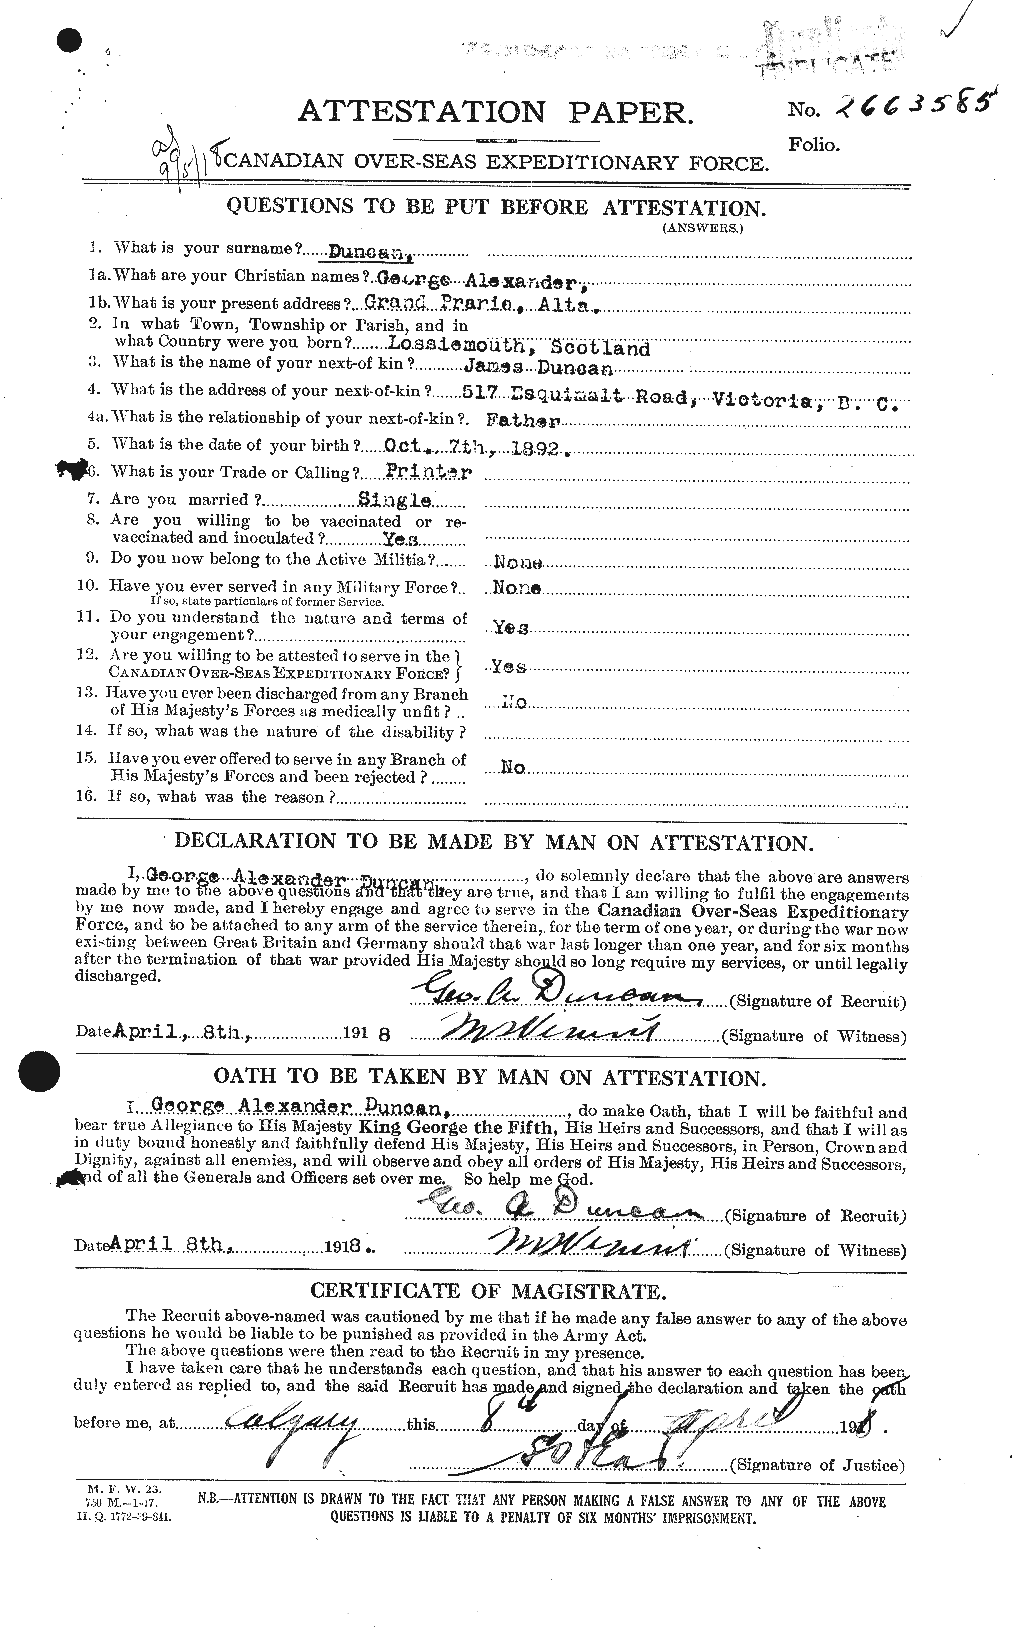 Personnel Records of the First World War - CEF 306473a